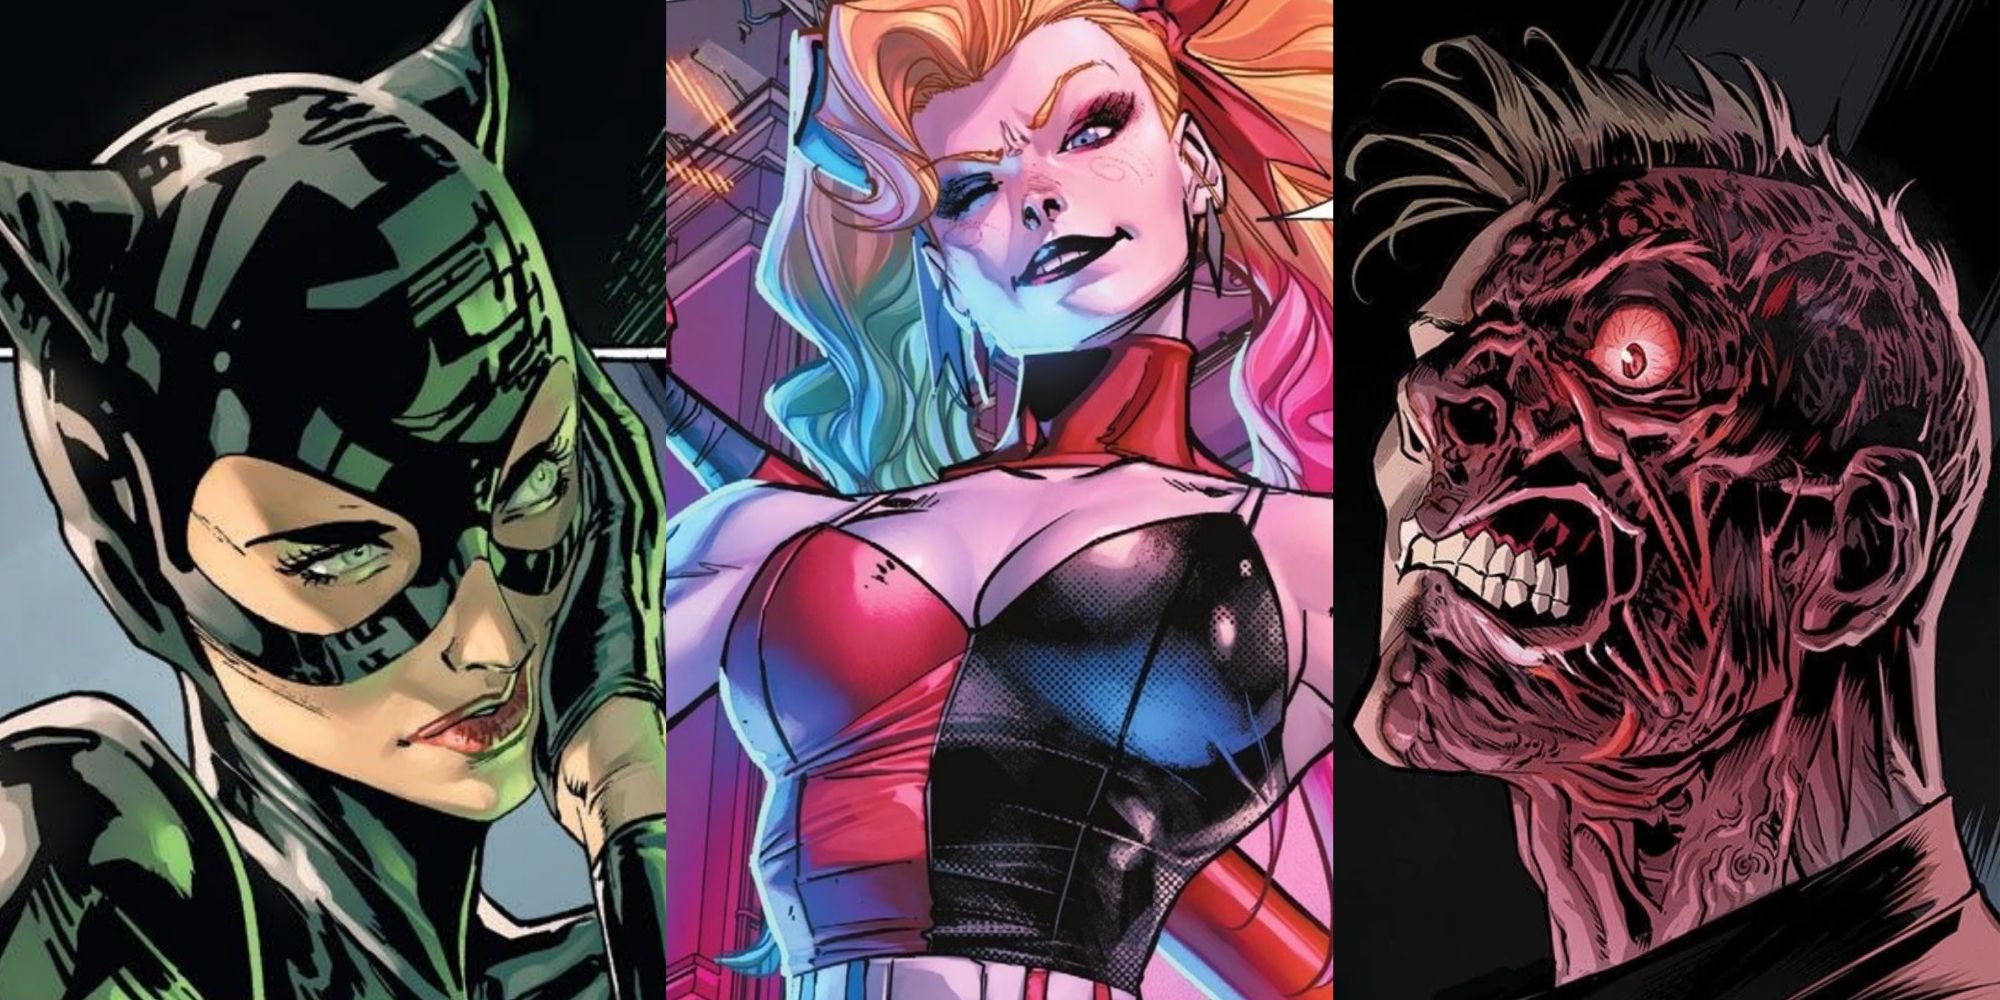 A split image of Catwoman, Harley Quinn, and Two-Face in DC Comics